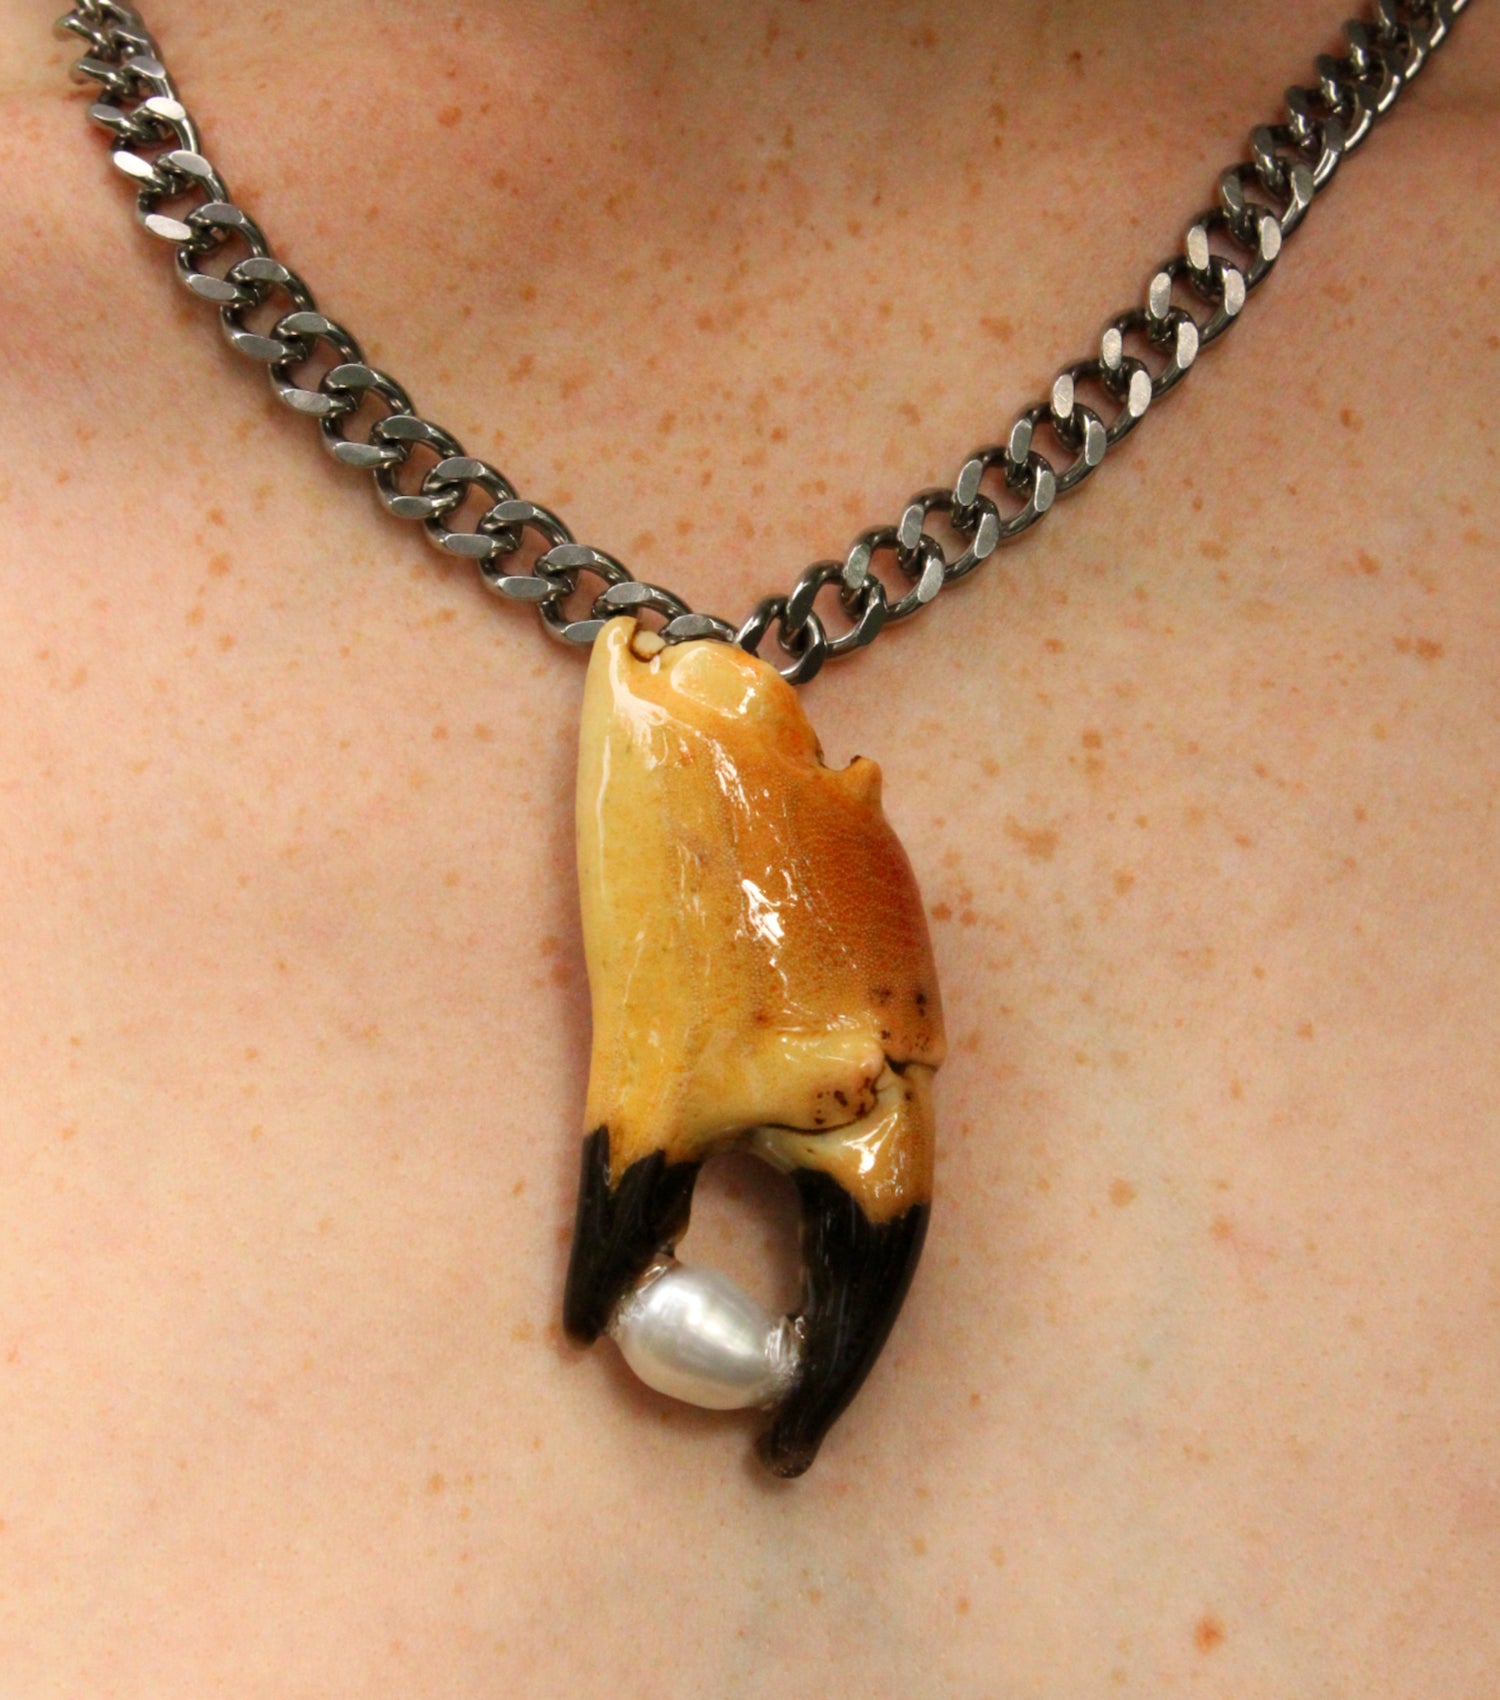 London jewelry, Kathleen, Shop Kathleen, Los Angeles, Kathleen, Boutique, Handmade Necklace, Seashell Necklace, Independent artist, independent designer, independent boutique, independent jewelry, beach jewelry, pearls, freshwater pearls, freshwater pearl choker, curb chain, crab claw, epoxy, resin, seashell jewelry, pearl choker, Tlysau